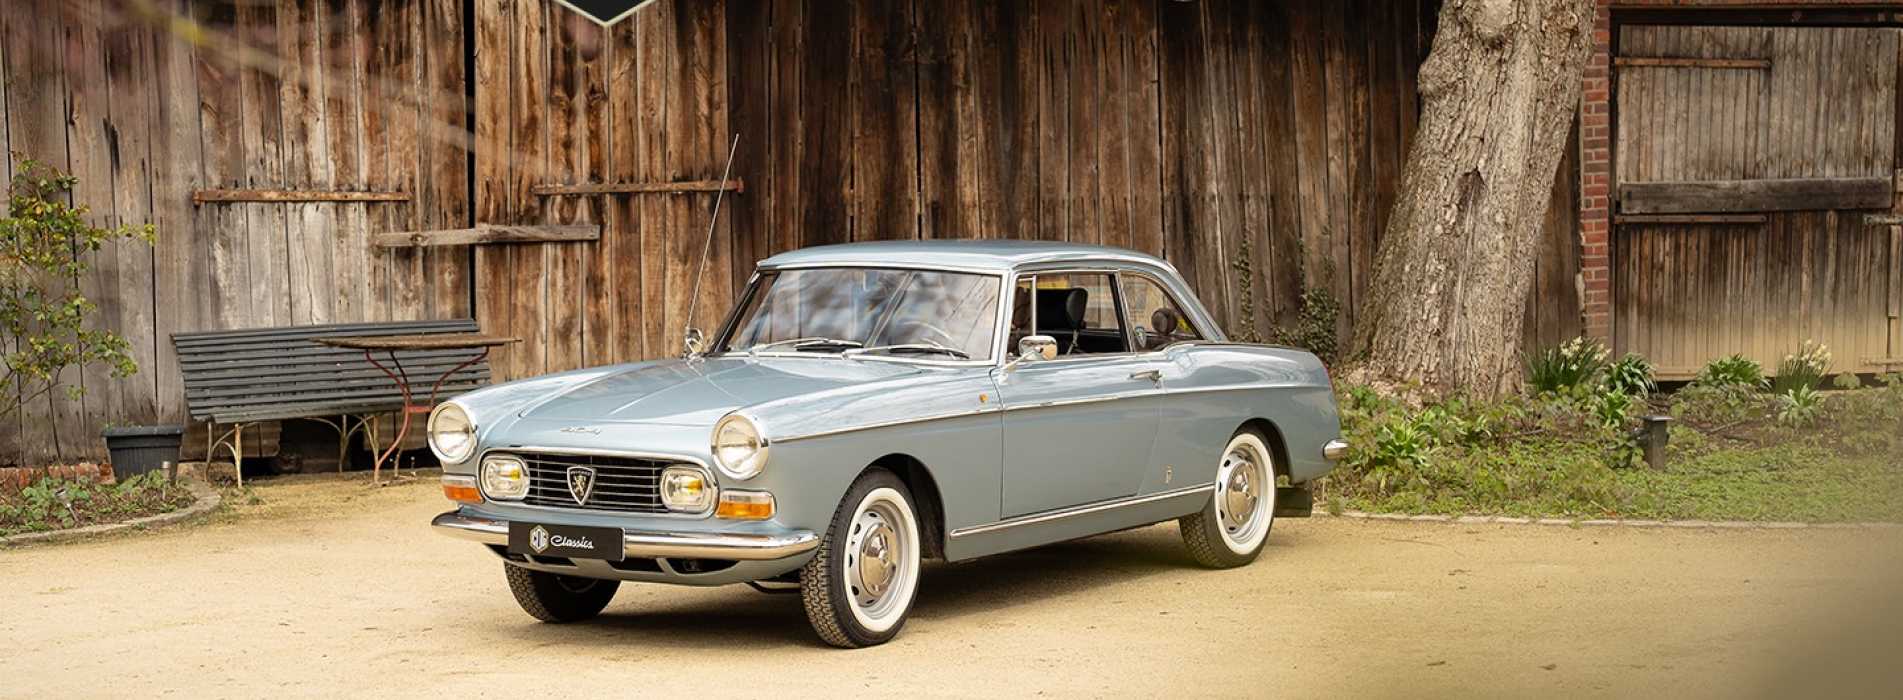 Peugeot 404 Coupe 10